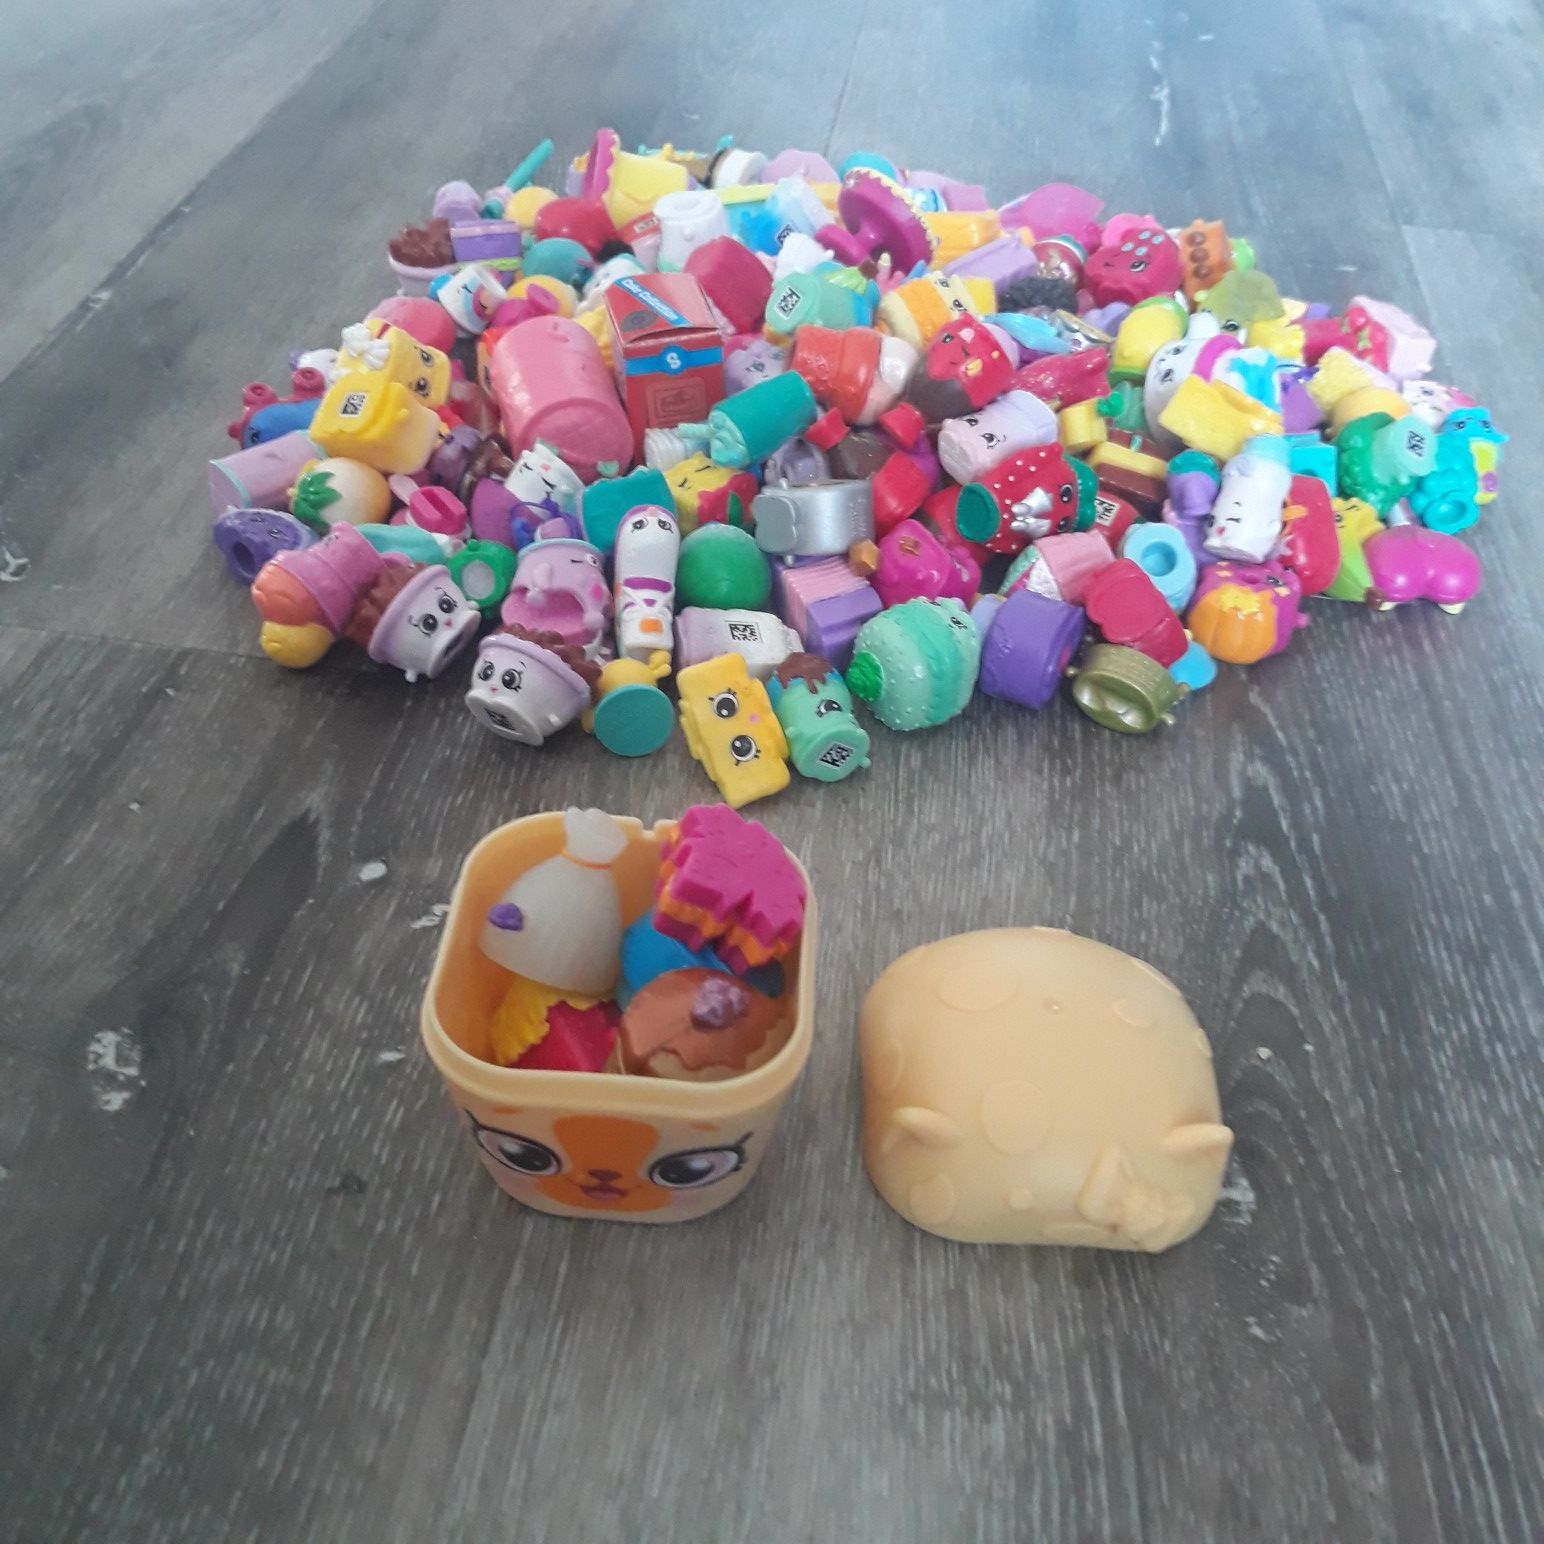 Toys - Shopkins 5 Piece Lot - All Picked At Random with Random Animal Container